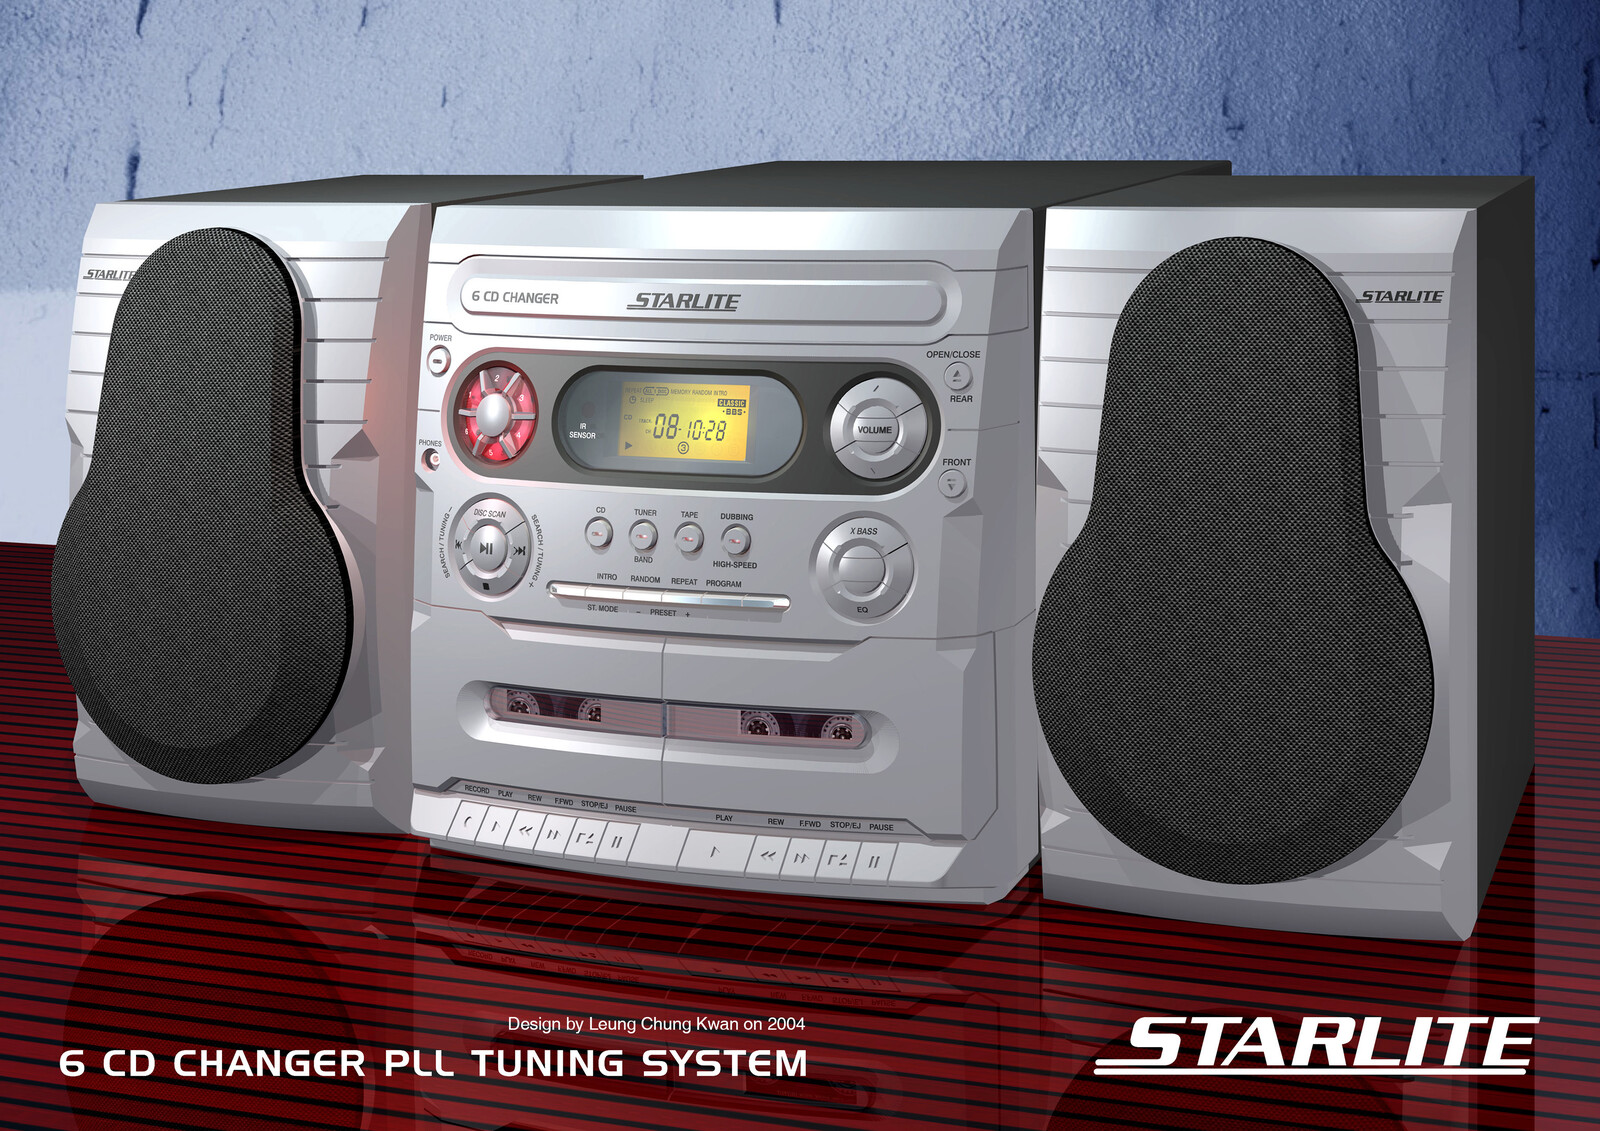 💎 6 CD Changer PLL Tuner with Double Cassette Hi-Fi | Design by Leung Chung Kwan on 2004 💎
Brand Name︰Starlite | Client︰Star Light Electronics Co., LTD.
Other Views︰http://bit.ly/sl02d-6cd-pll-double